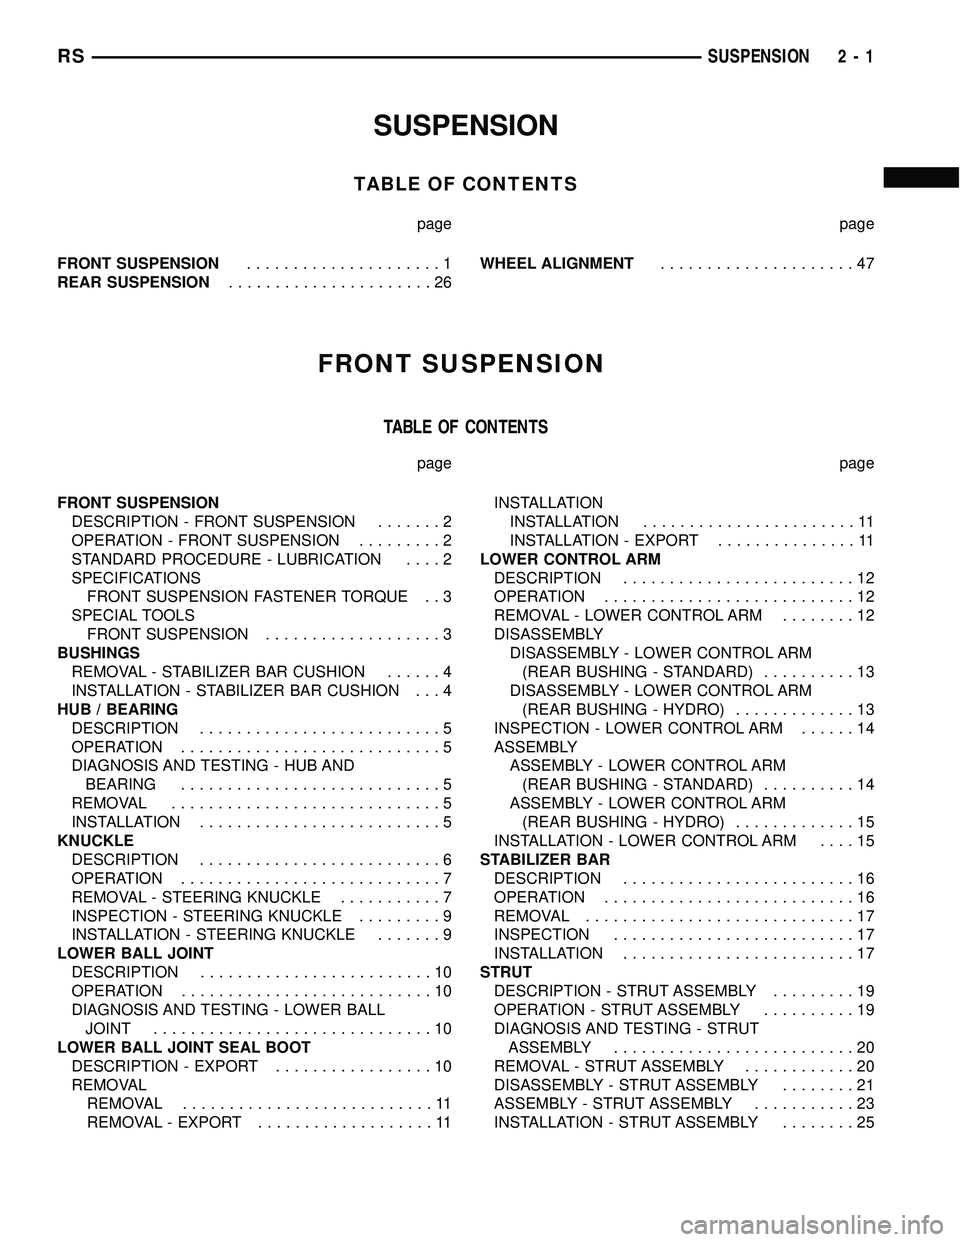 CHRYSLER VOYAGER 2005  Service Manual SUSPENSION
TABLE OF CONTENTS
page page
FRONT SUSPENSION.....................1
REAR SUSPENSION......................26WHEEL ALIGNMENT.....................47
FRONT SUSPENSION
TABLE OF CONTENTS
page page